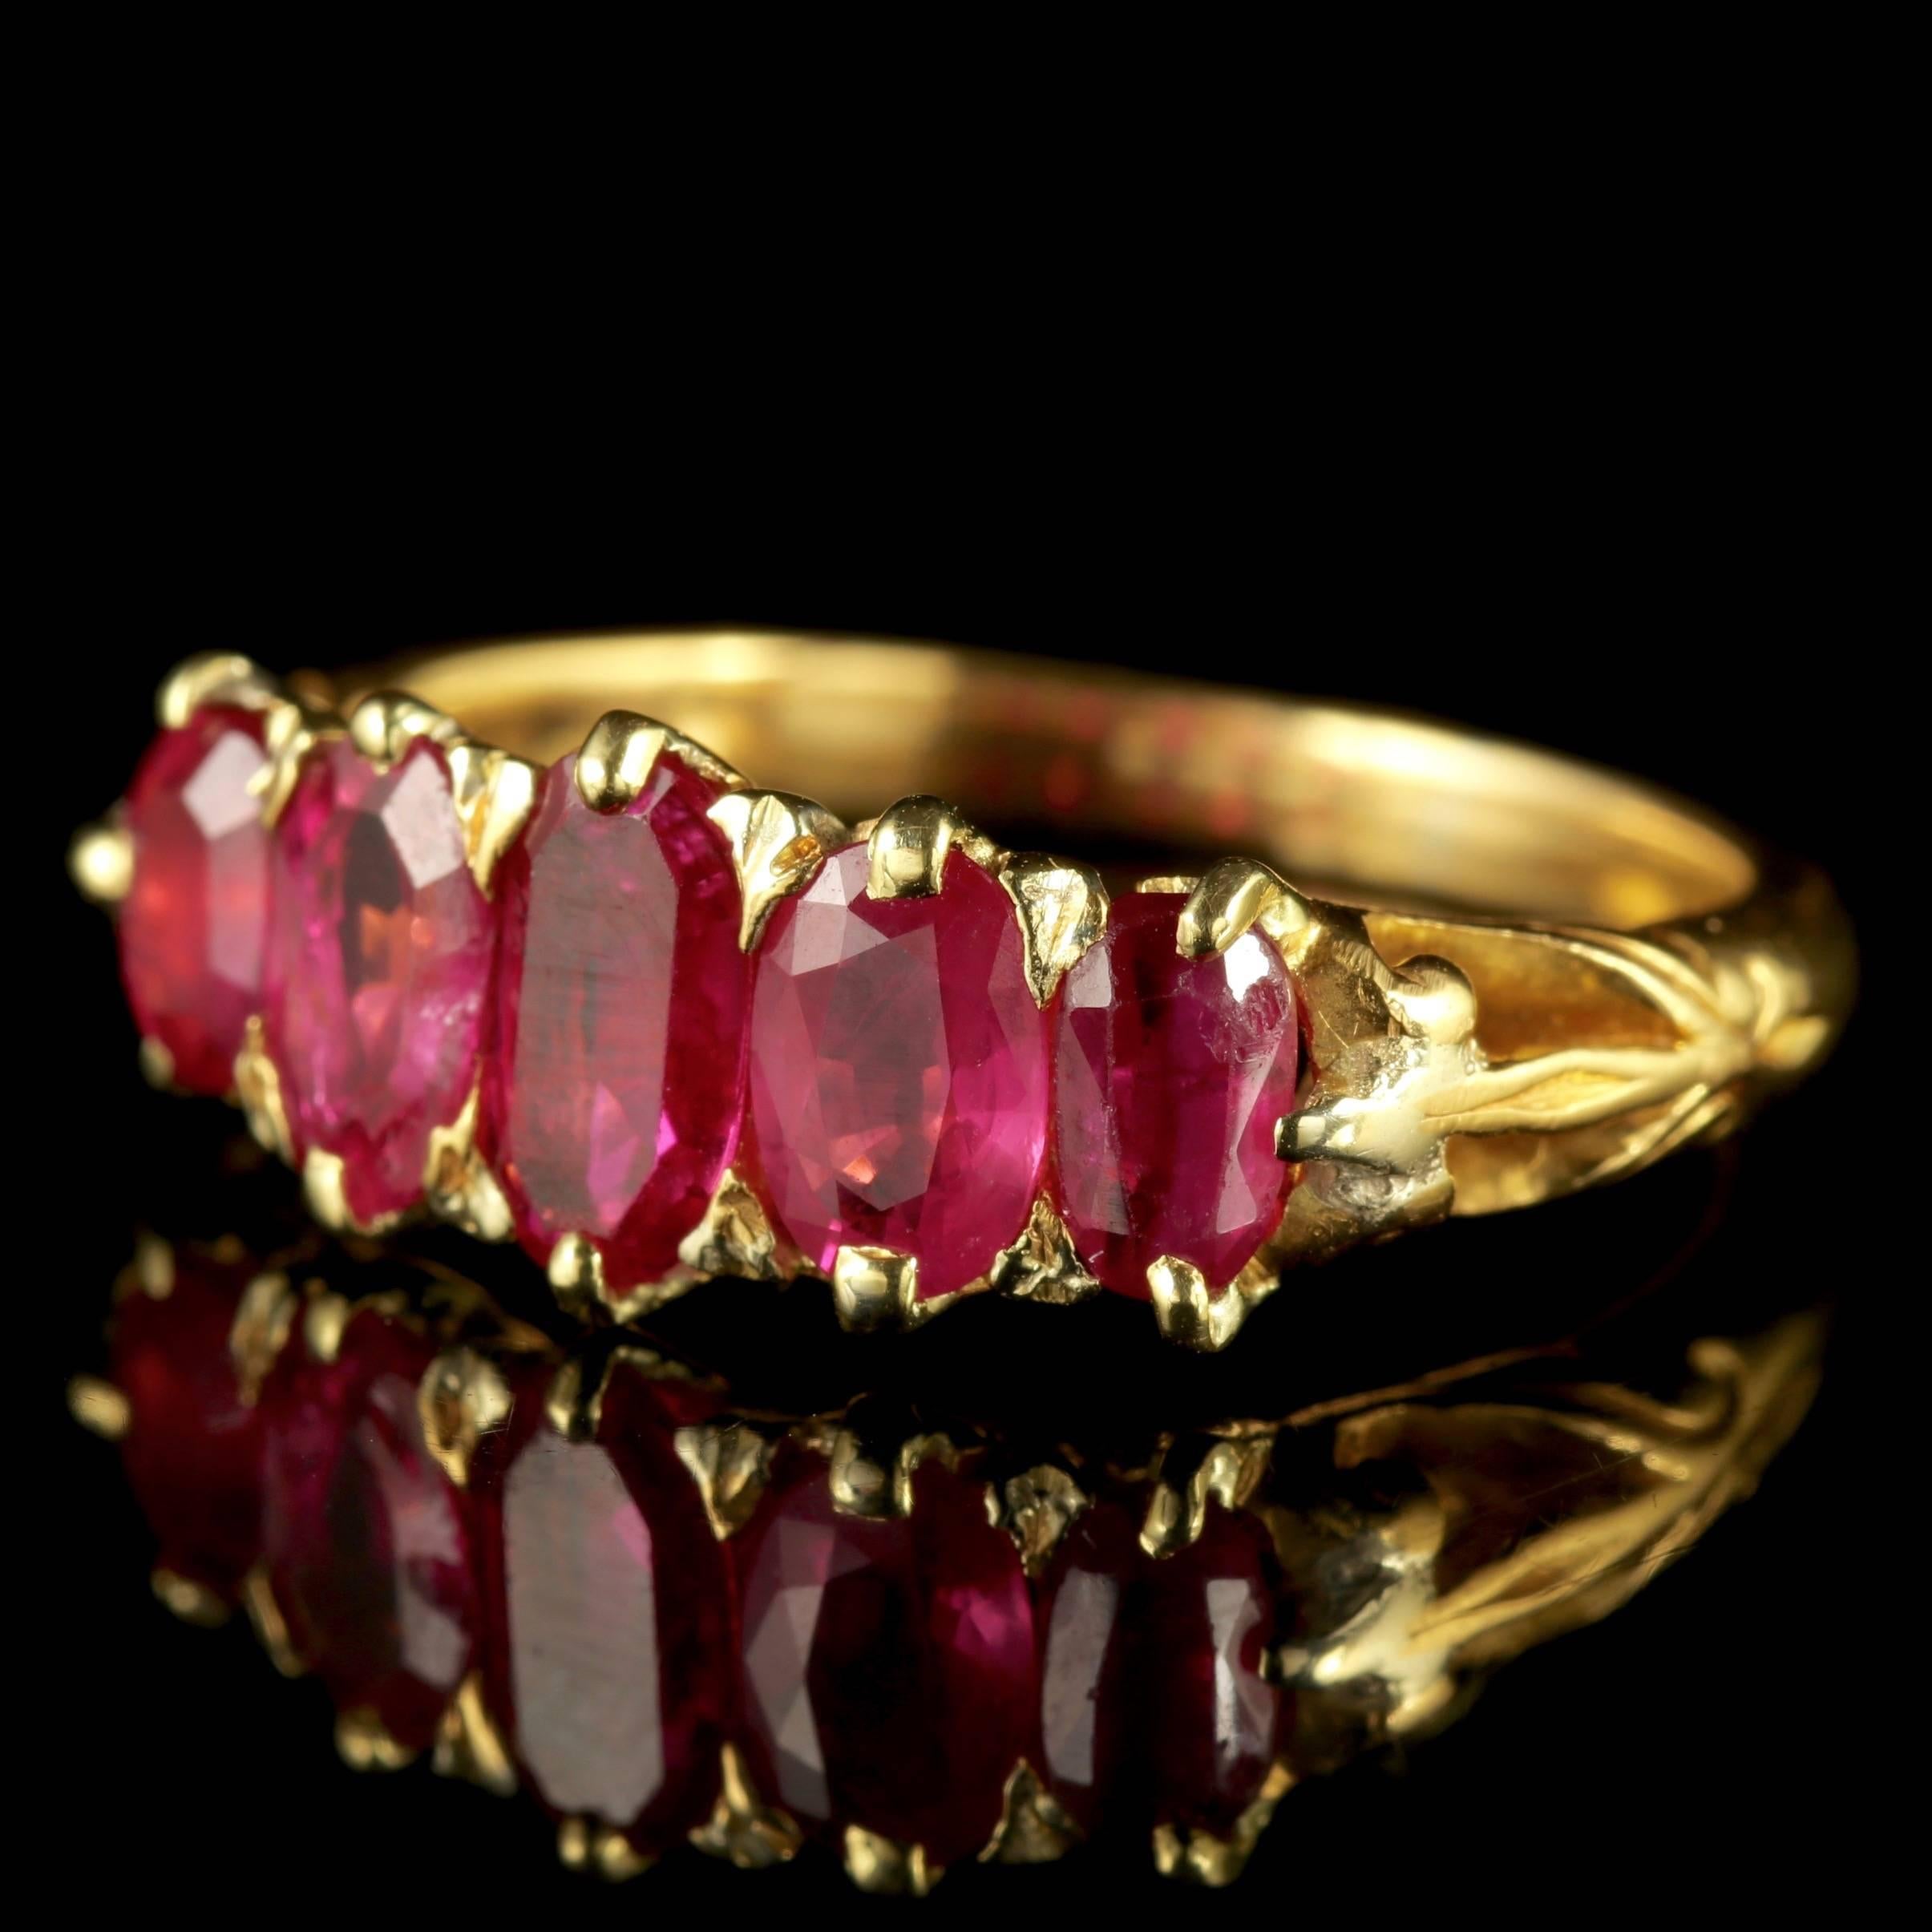 To read more please click continue reading below-

This fabulous Antique Victorian Burmese Ruby ring is fully certified with 2.14ct of natural Rubies.

Four of the Rubies are unheated natural Burmese Rubies which are the pinnacle of all